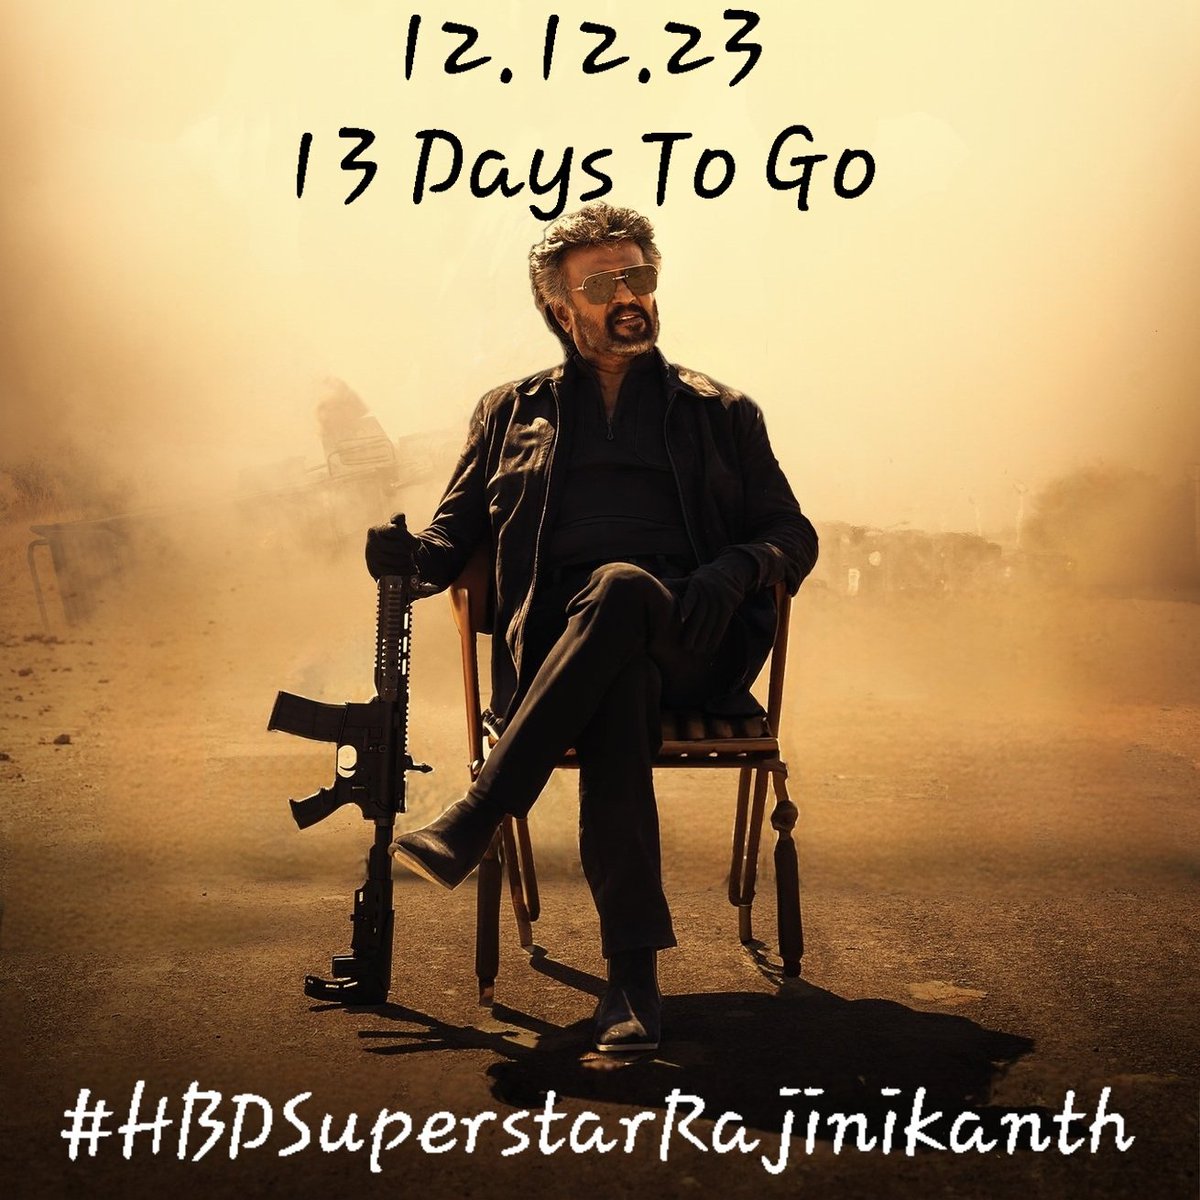 The day that every Rajini blood awaits. 
The man who makes living even more meaningful and joyful.
We will celebrate you like no other Thalaiva
#HBDSuperstarRajnikanth in 13 Days and counting...
#Rajinikanth #ThalaivarNirantharam